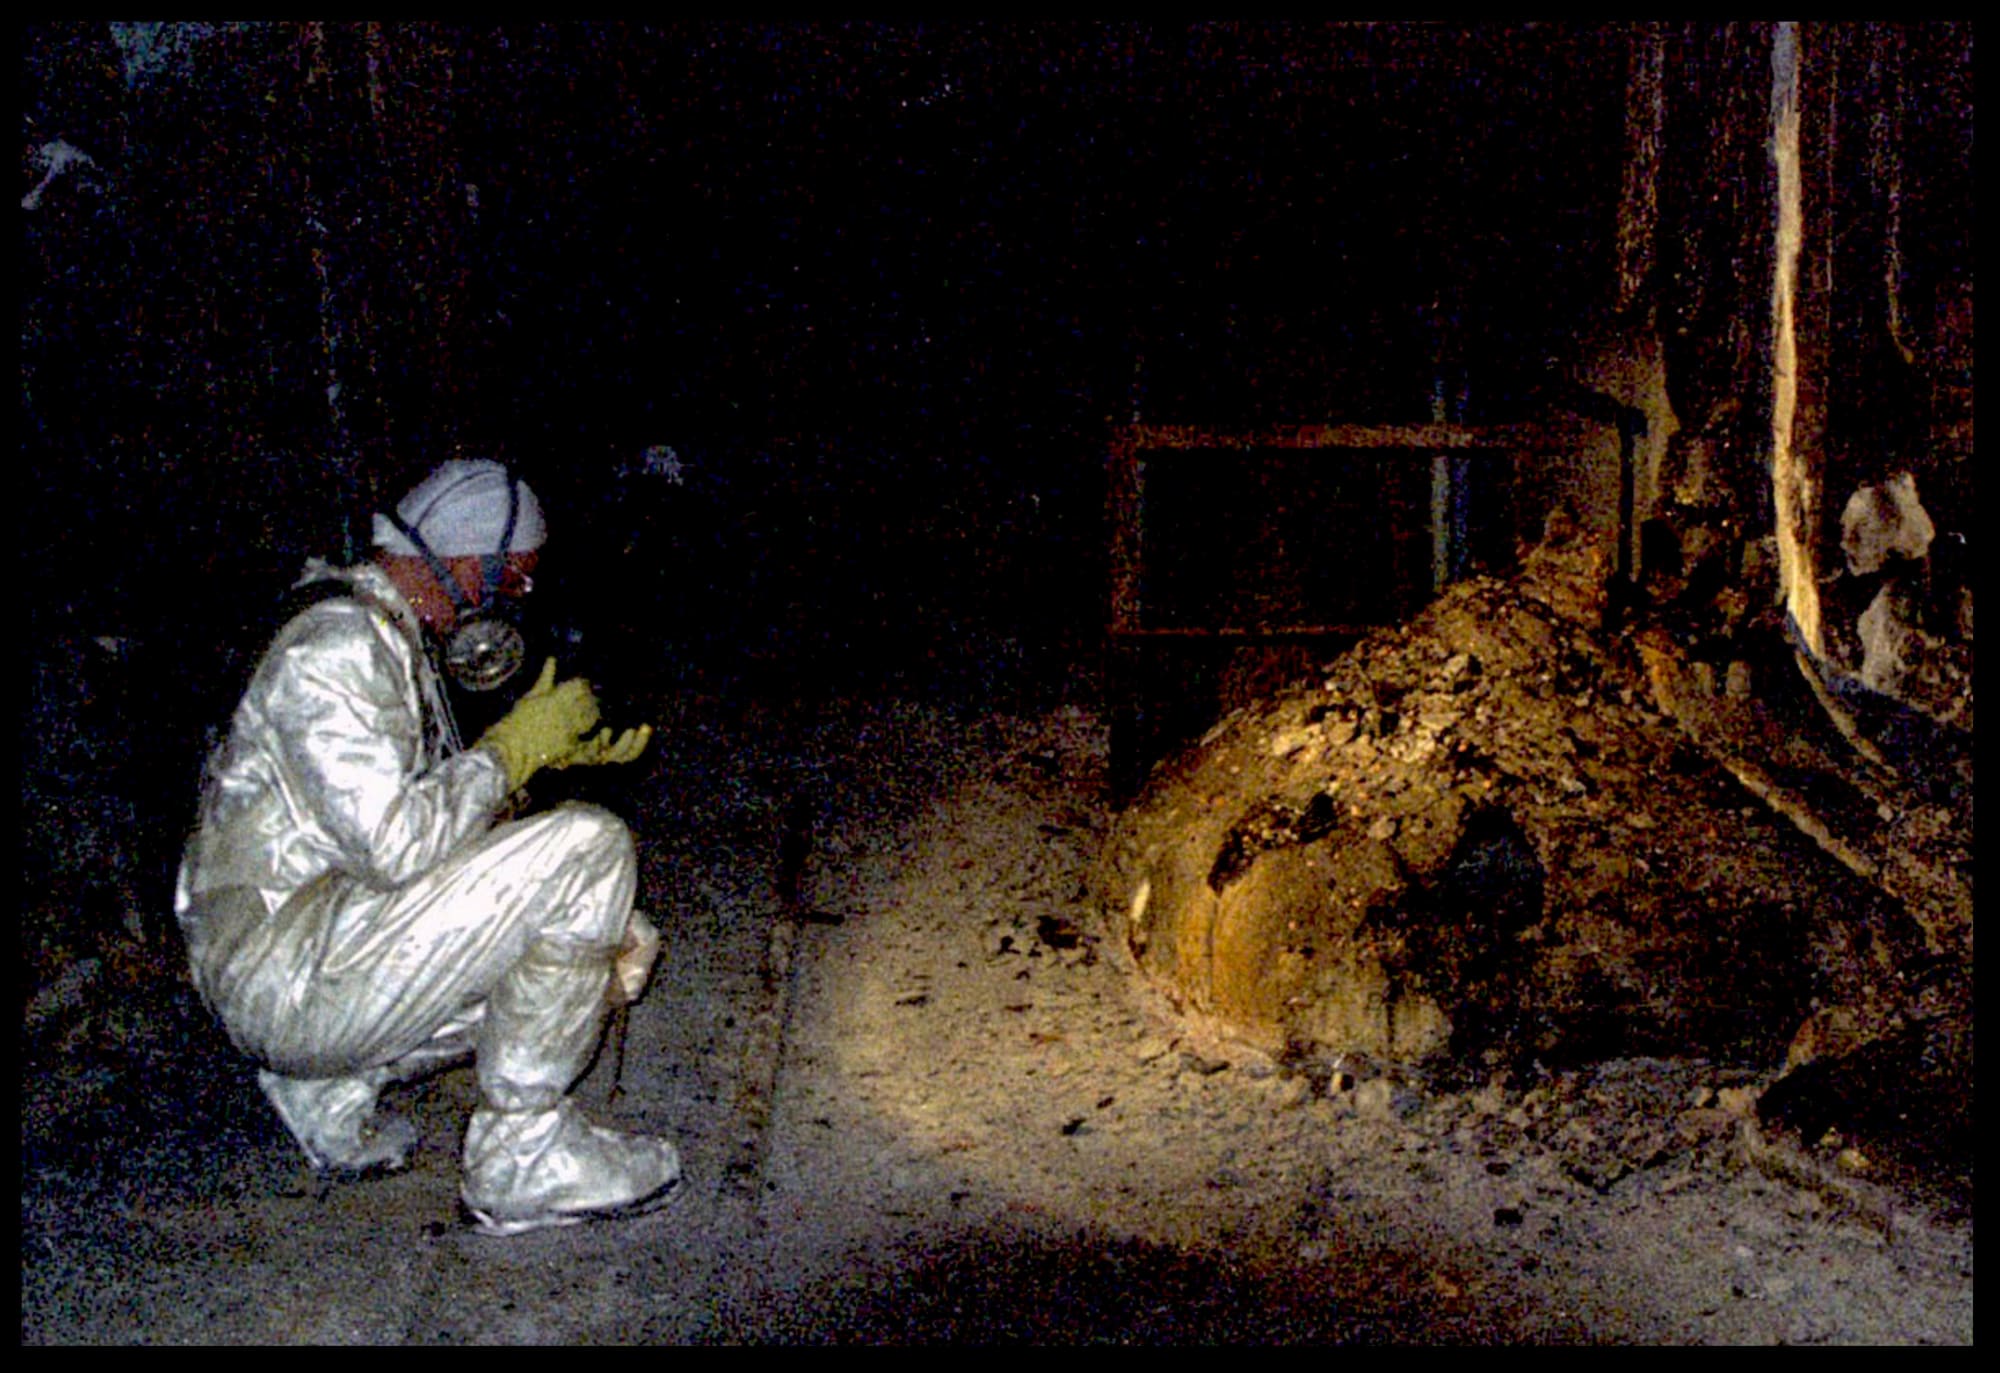 The Elephants Foot of the Chernobyl disaster is shown in the immediate aftermath of the meltdown. The “Elephant’s Foot”, named for its appearance, is a solid mass made of melted nuclear fuel mixed with lots of concrete, sand and core sealing material that the fuel had melted through. It lies in a basement area under the original location of the core.